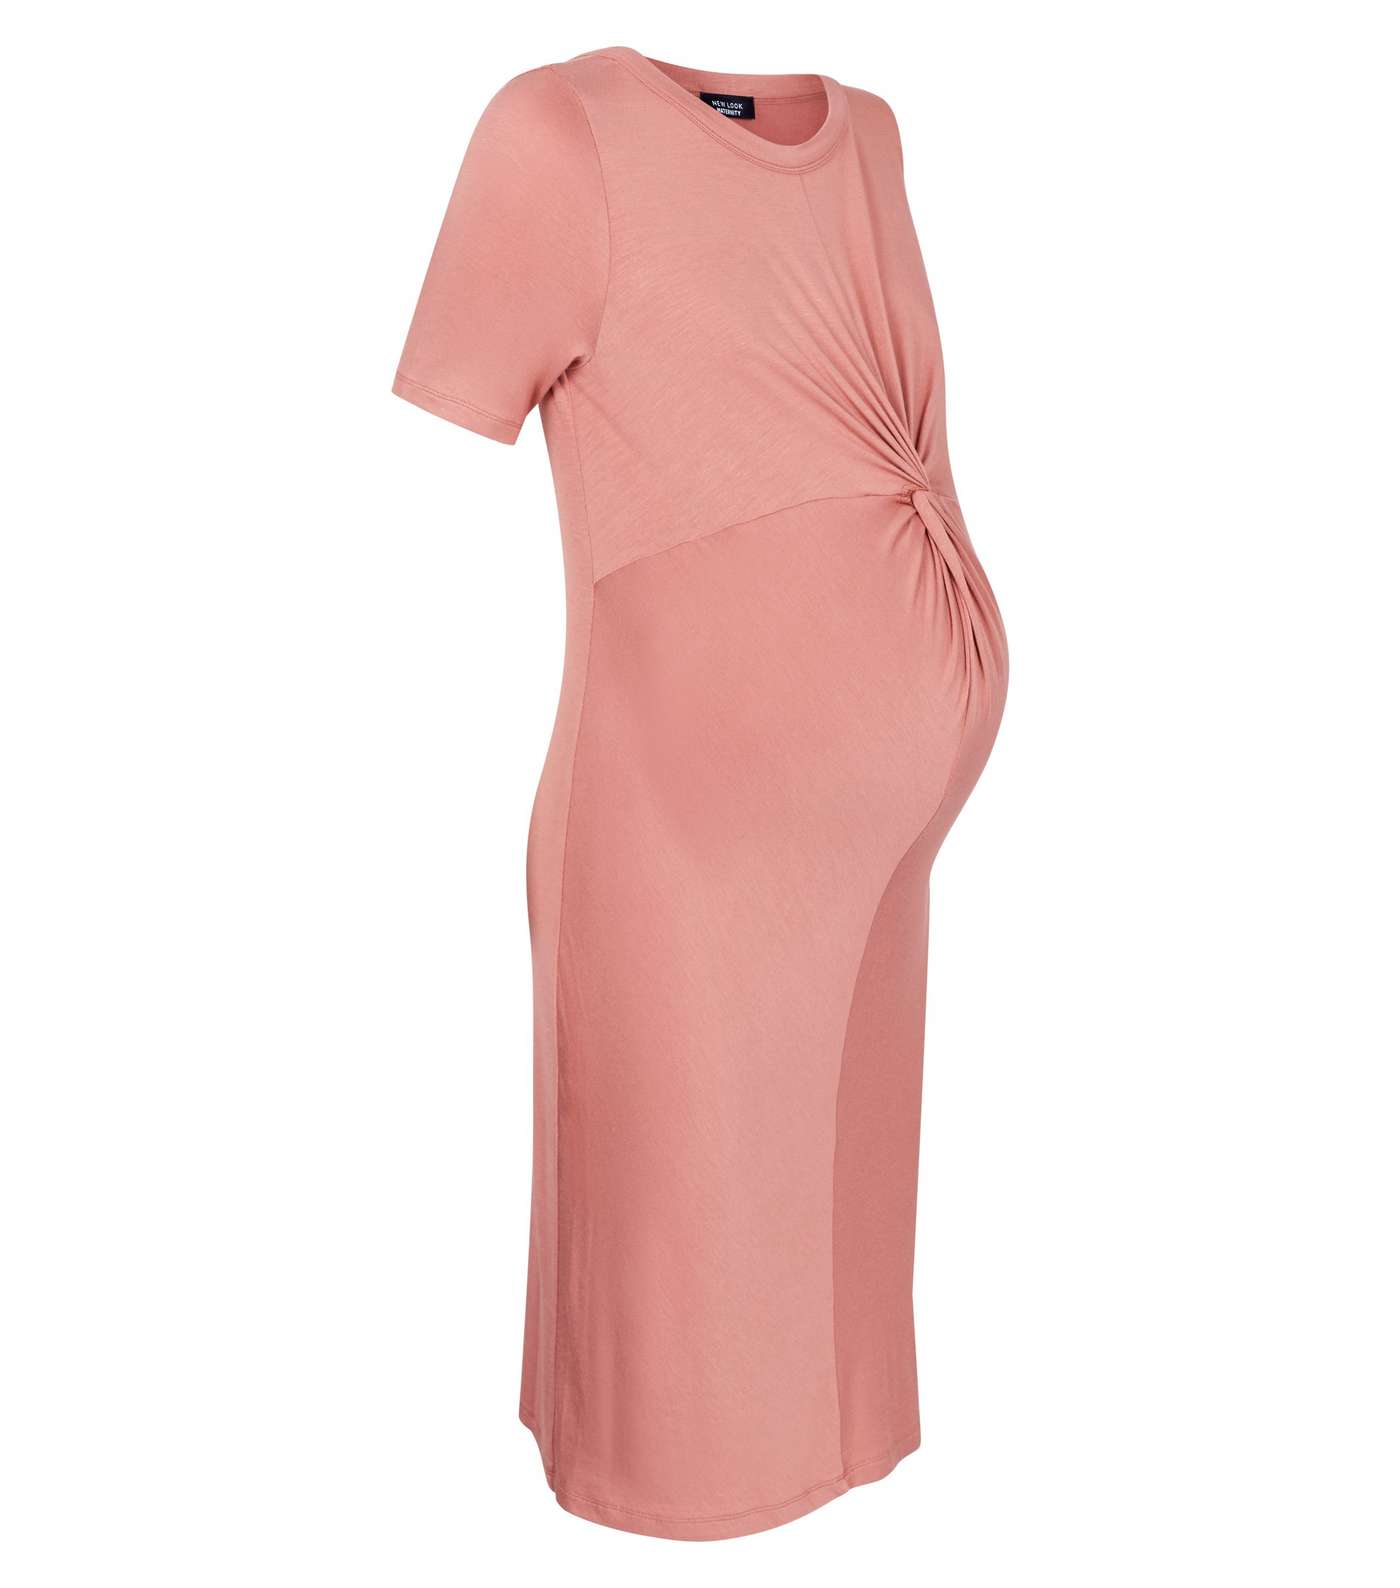 Maternity Coral Twist Front Bodycon Dress Image 4